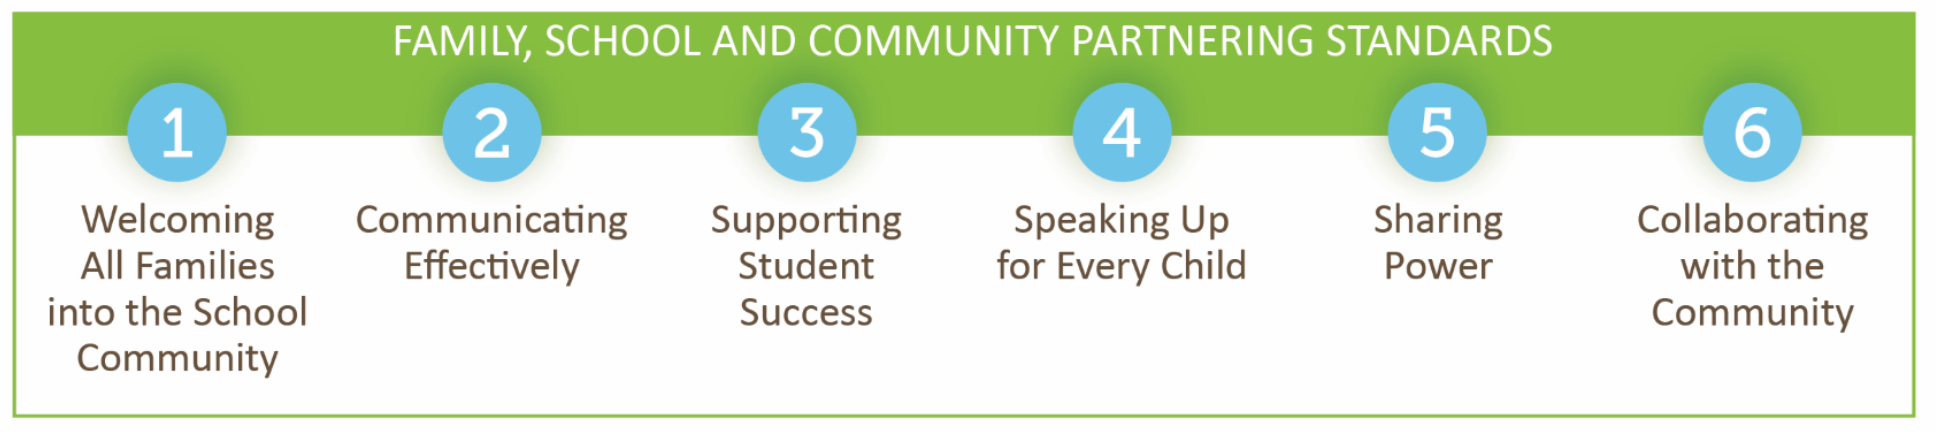 Family, School and Community Partnering Standards